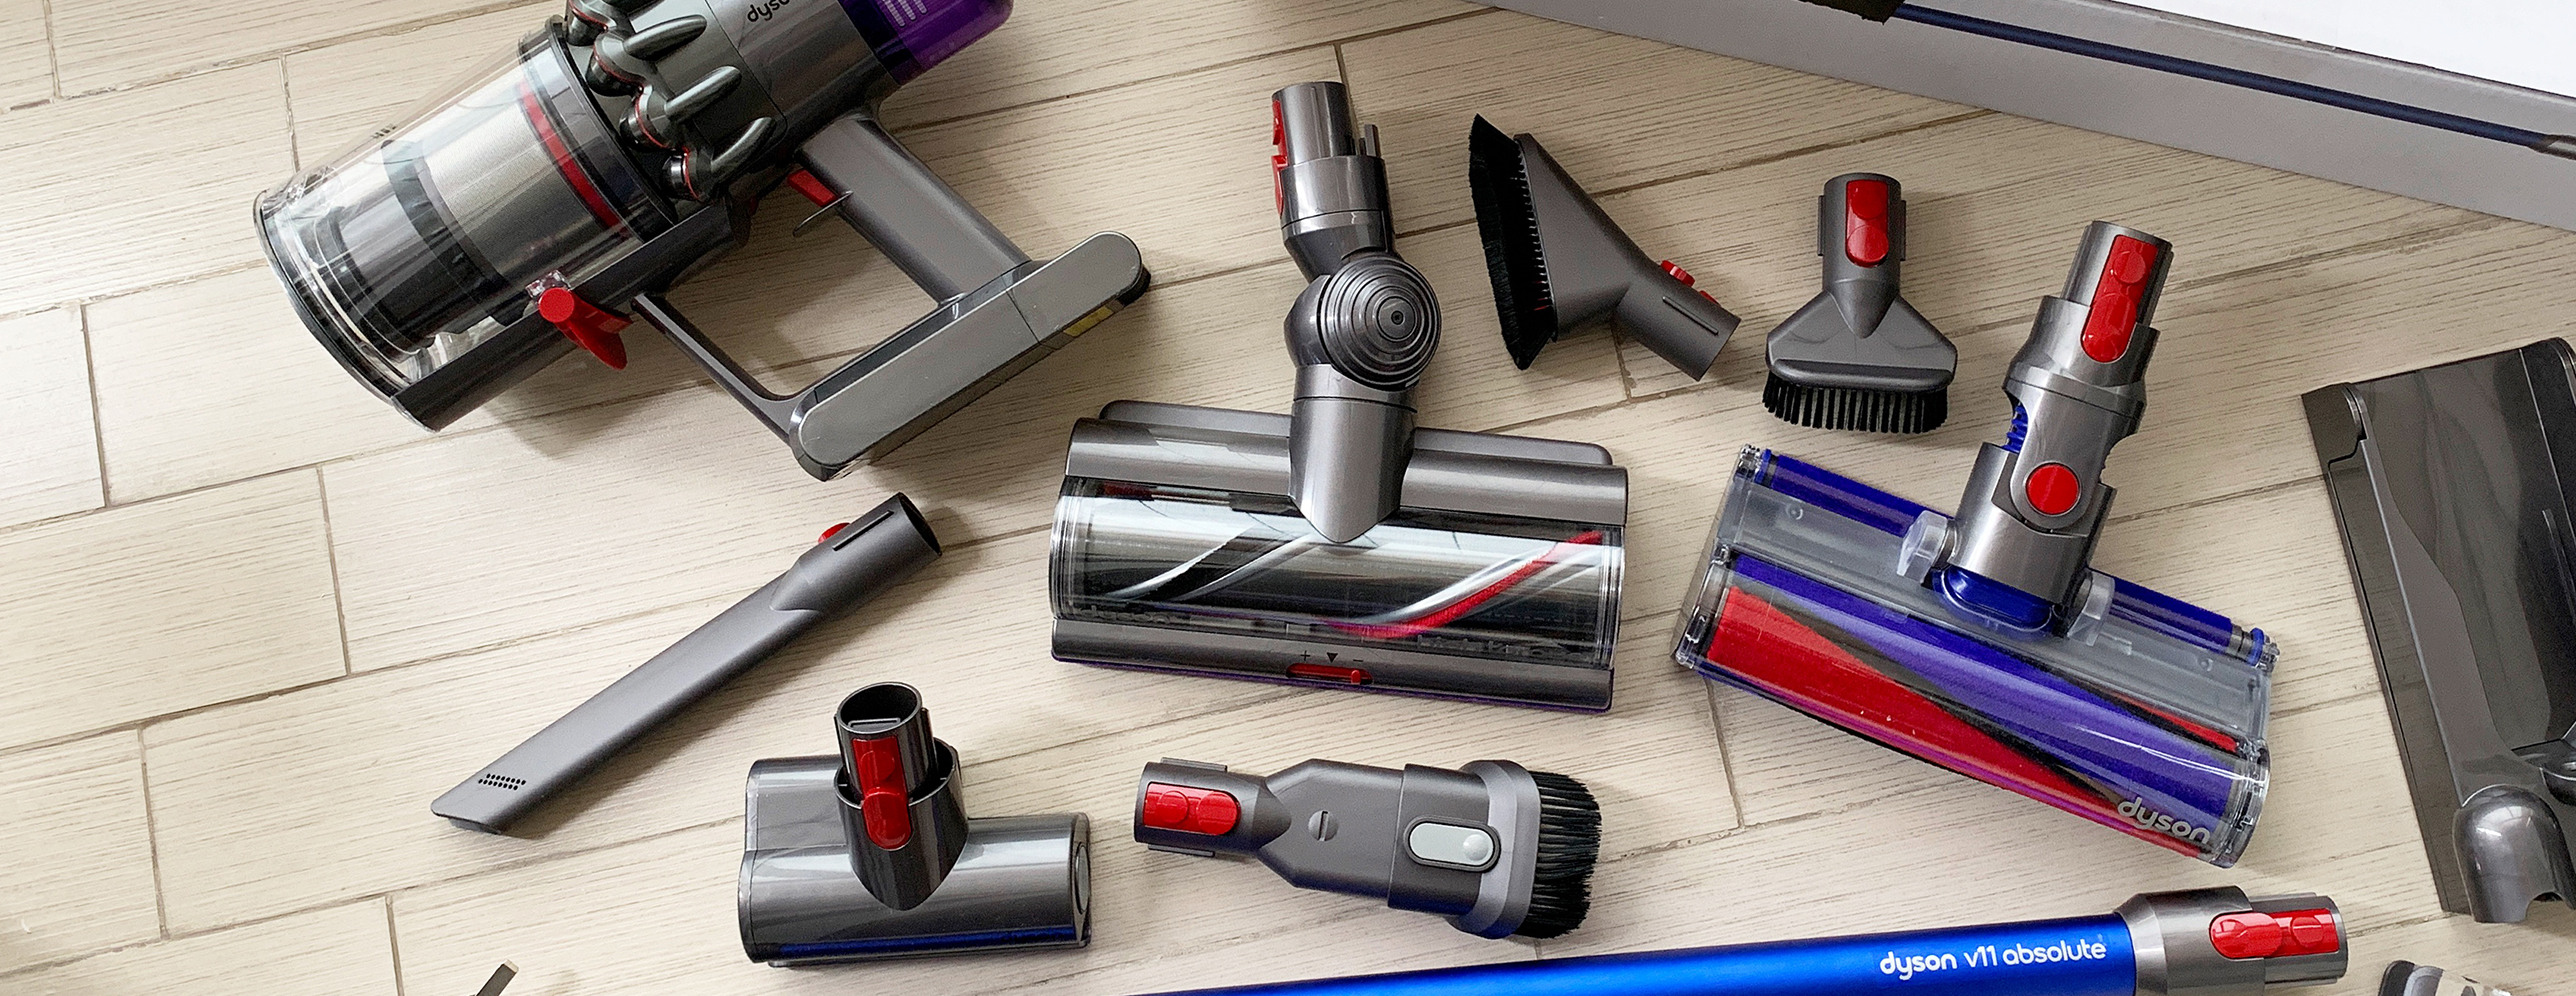 Dyson V11 Review - The Ultimate Australian Guide 2021 &